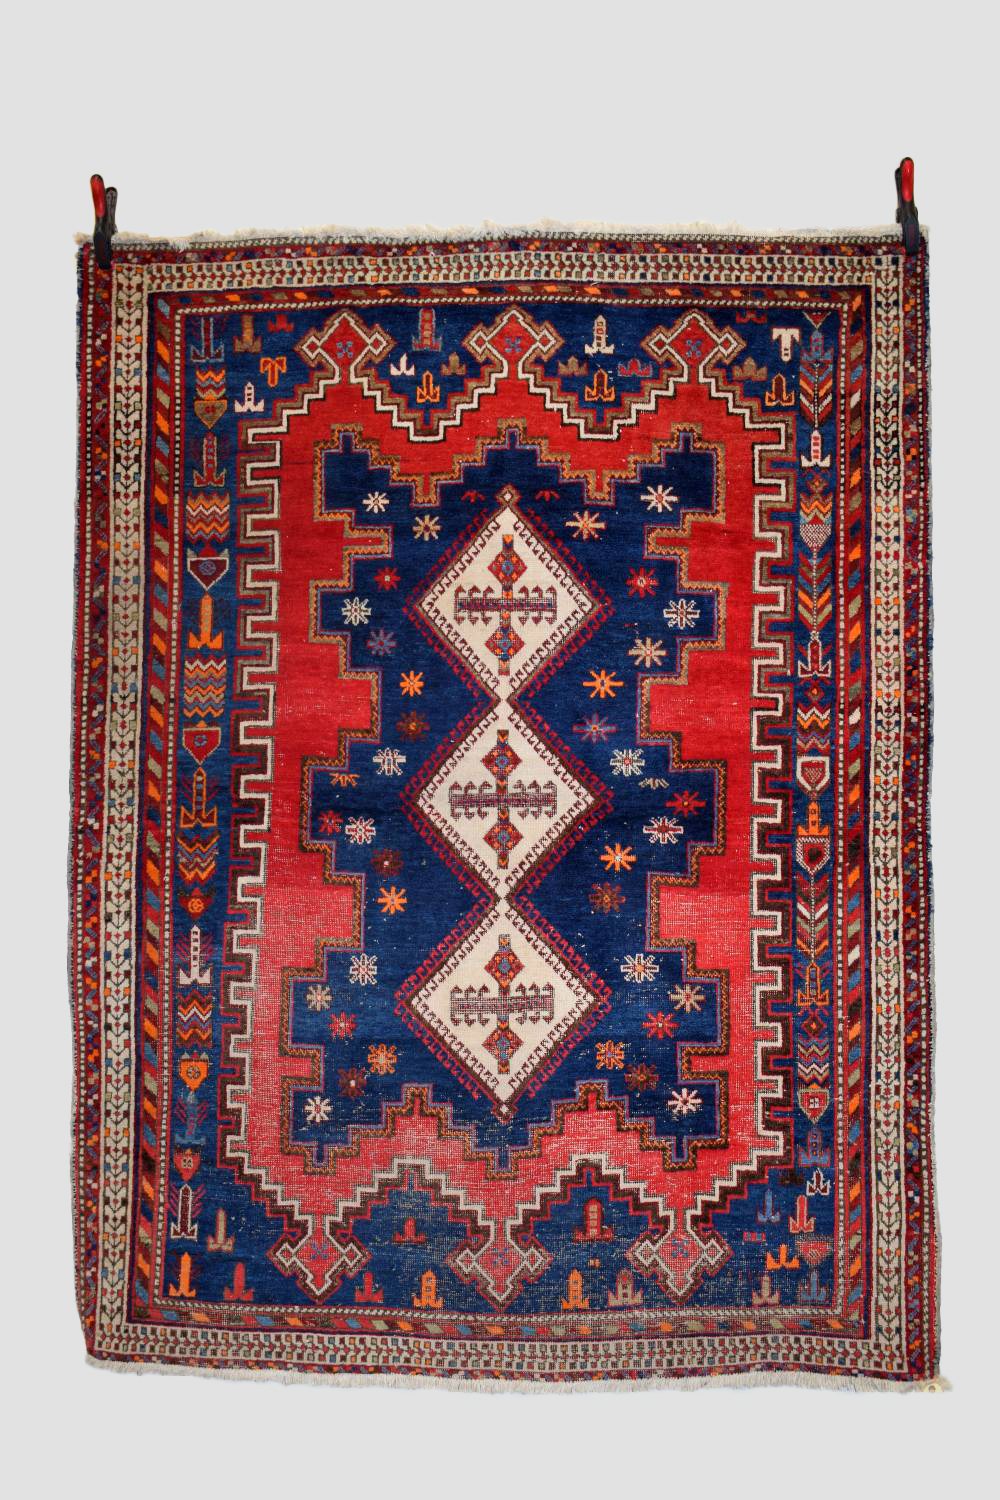 Afshar rug, Kerman area, south east Persia, circa 1930s-40s, 6ft. 8in. X 5ft. 1in. 2.03m. X 1.55m.